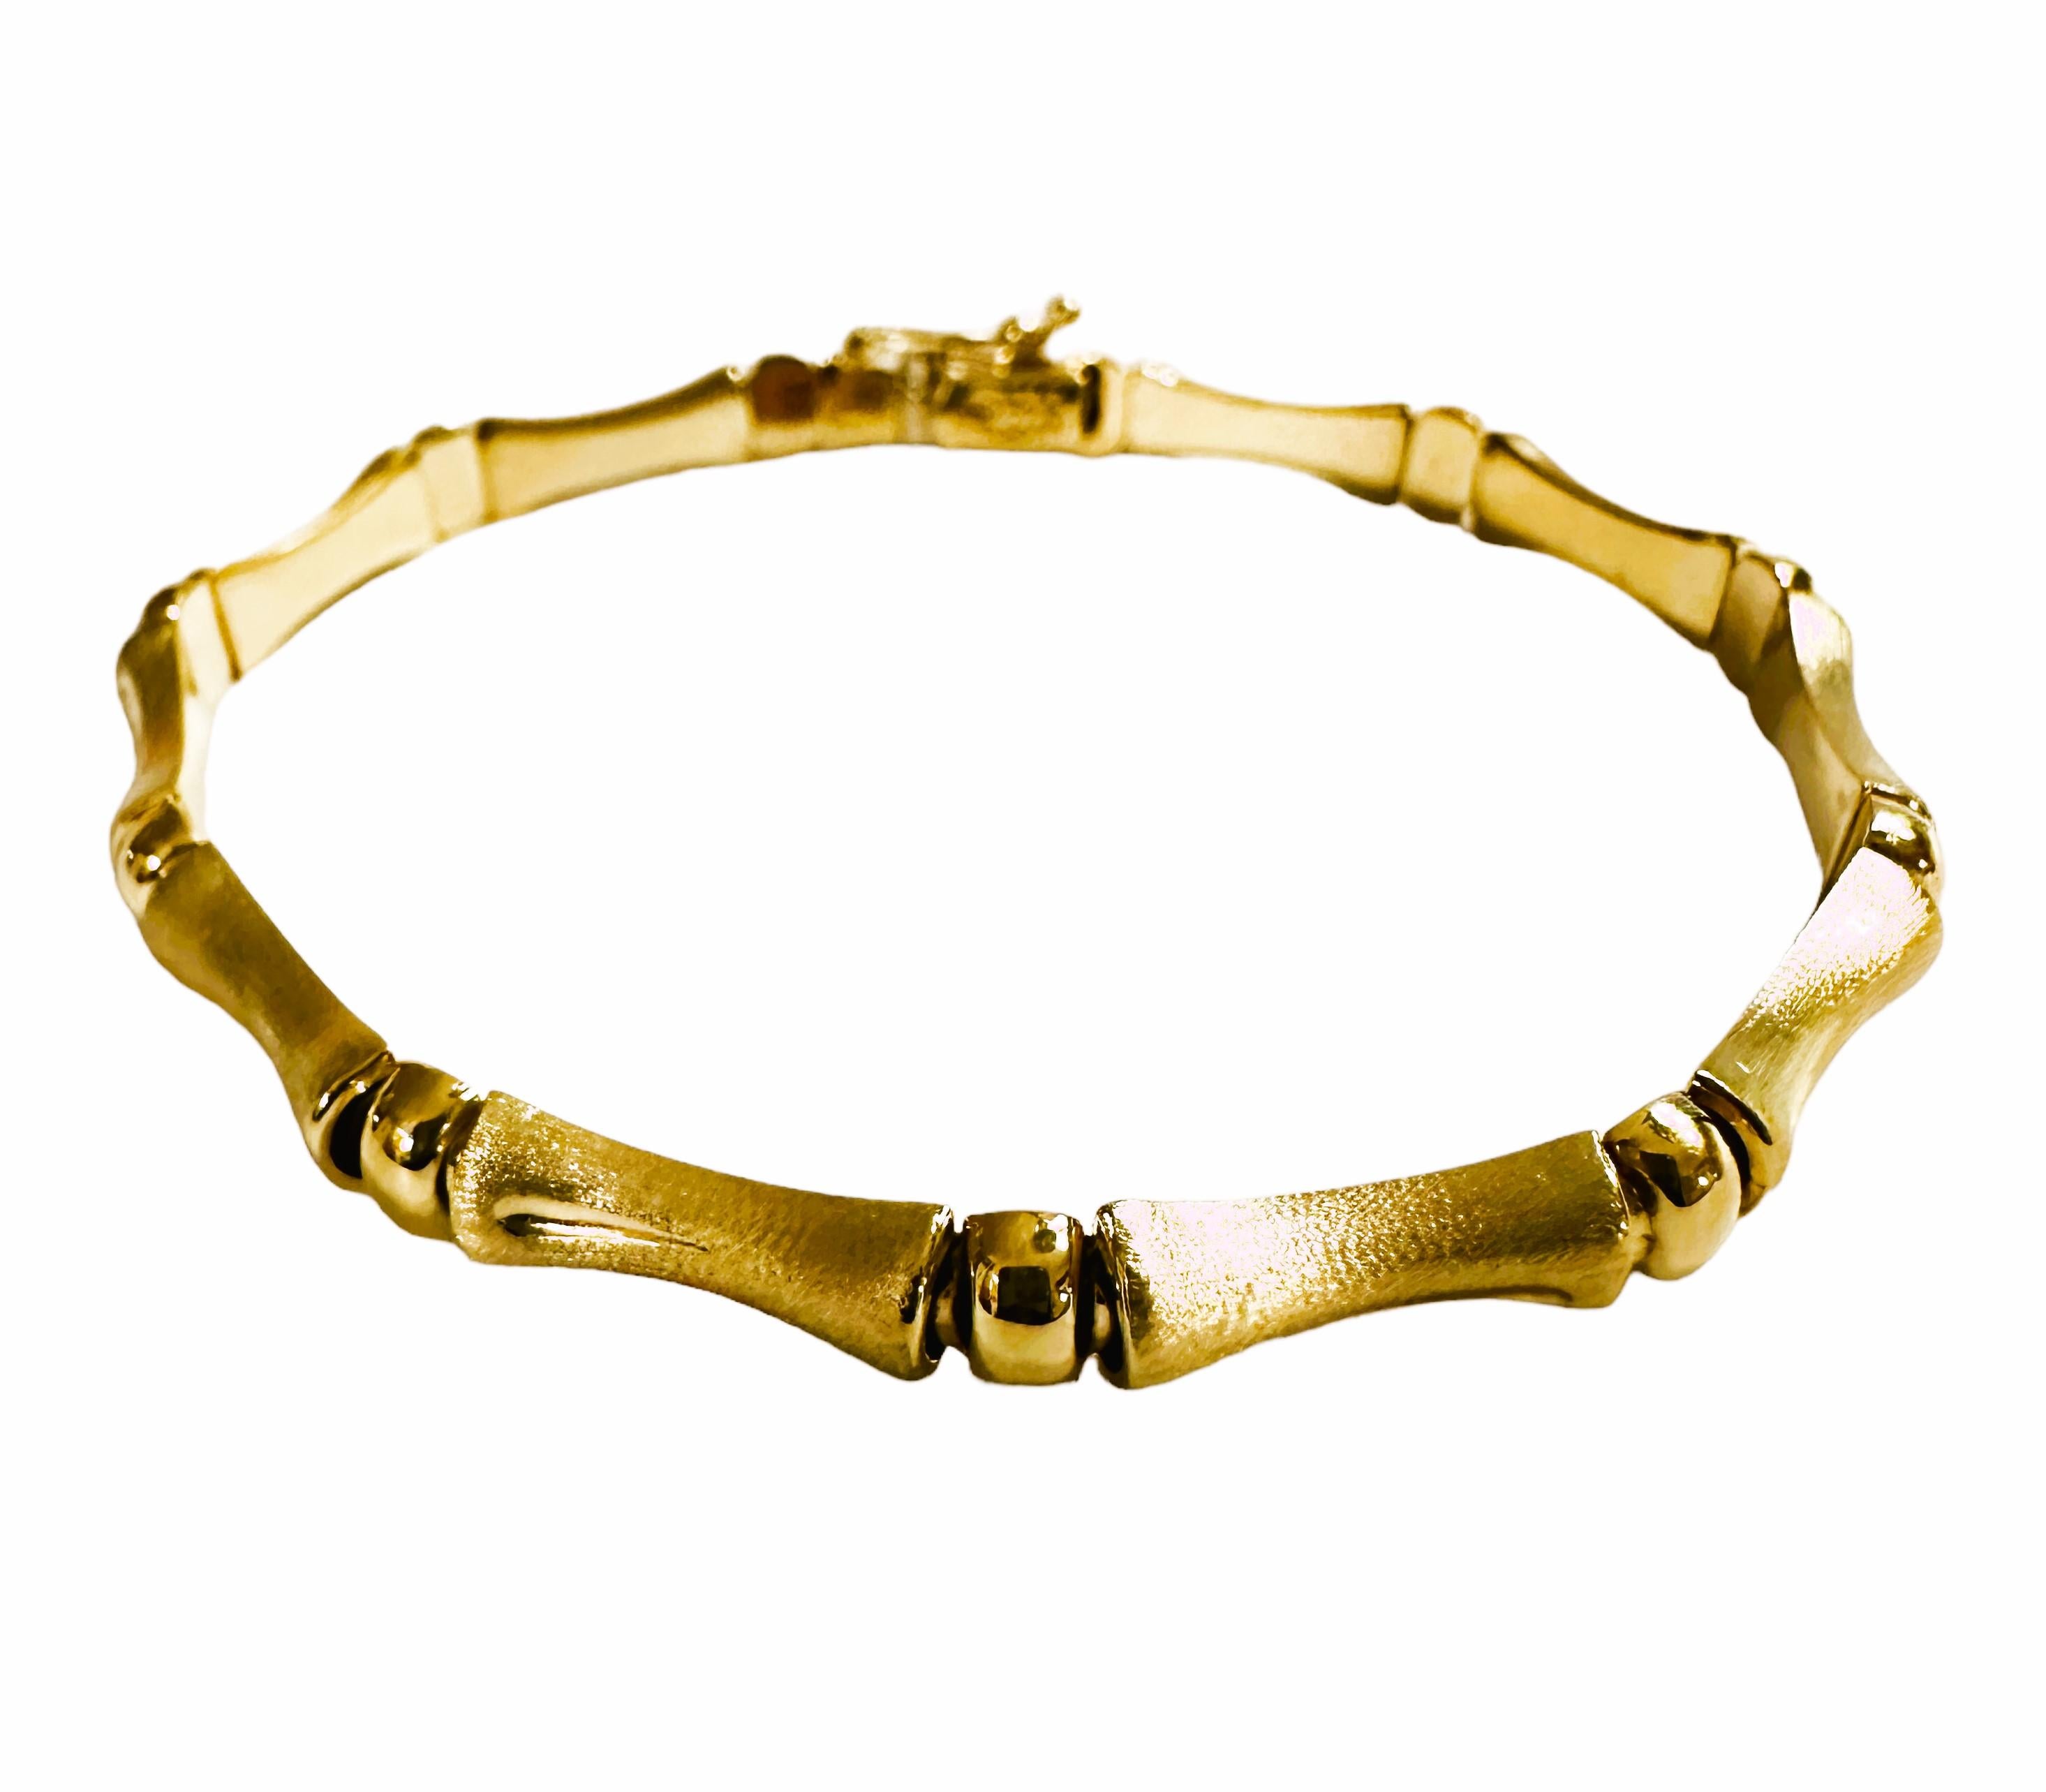 Art Nouveau 14k Yellow Brushed Gold Bamboo ARPAS Link Bracelet 7.75 Inches - 9.4 Grams